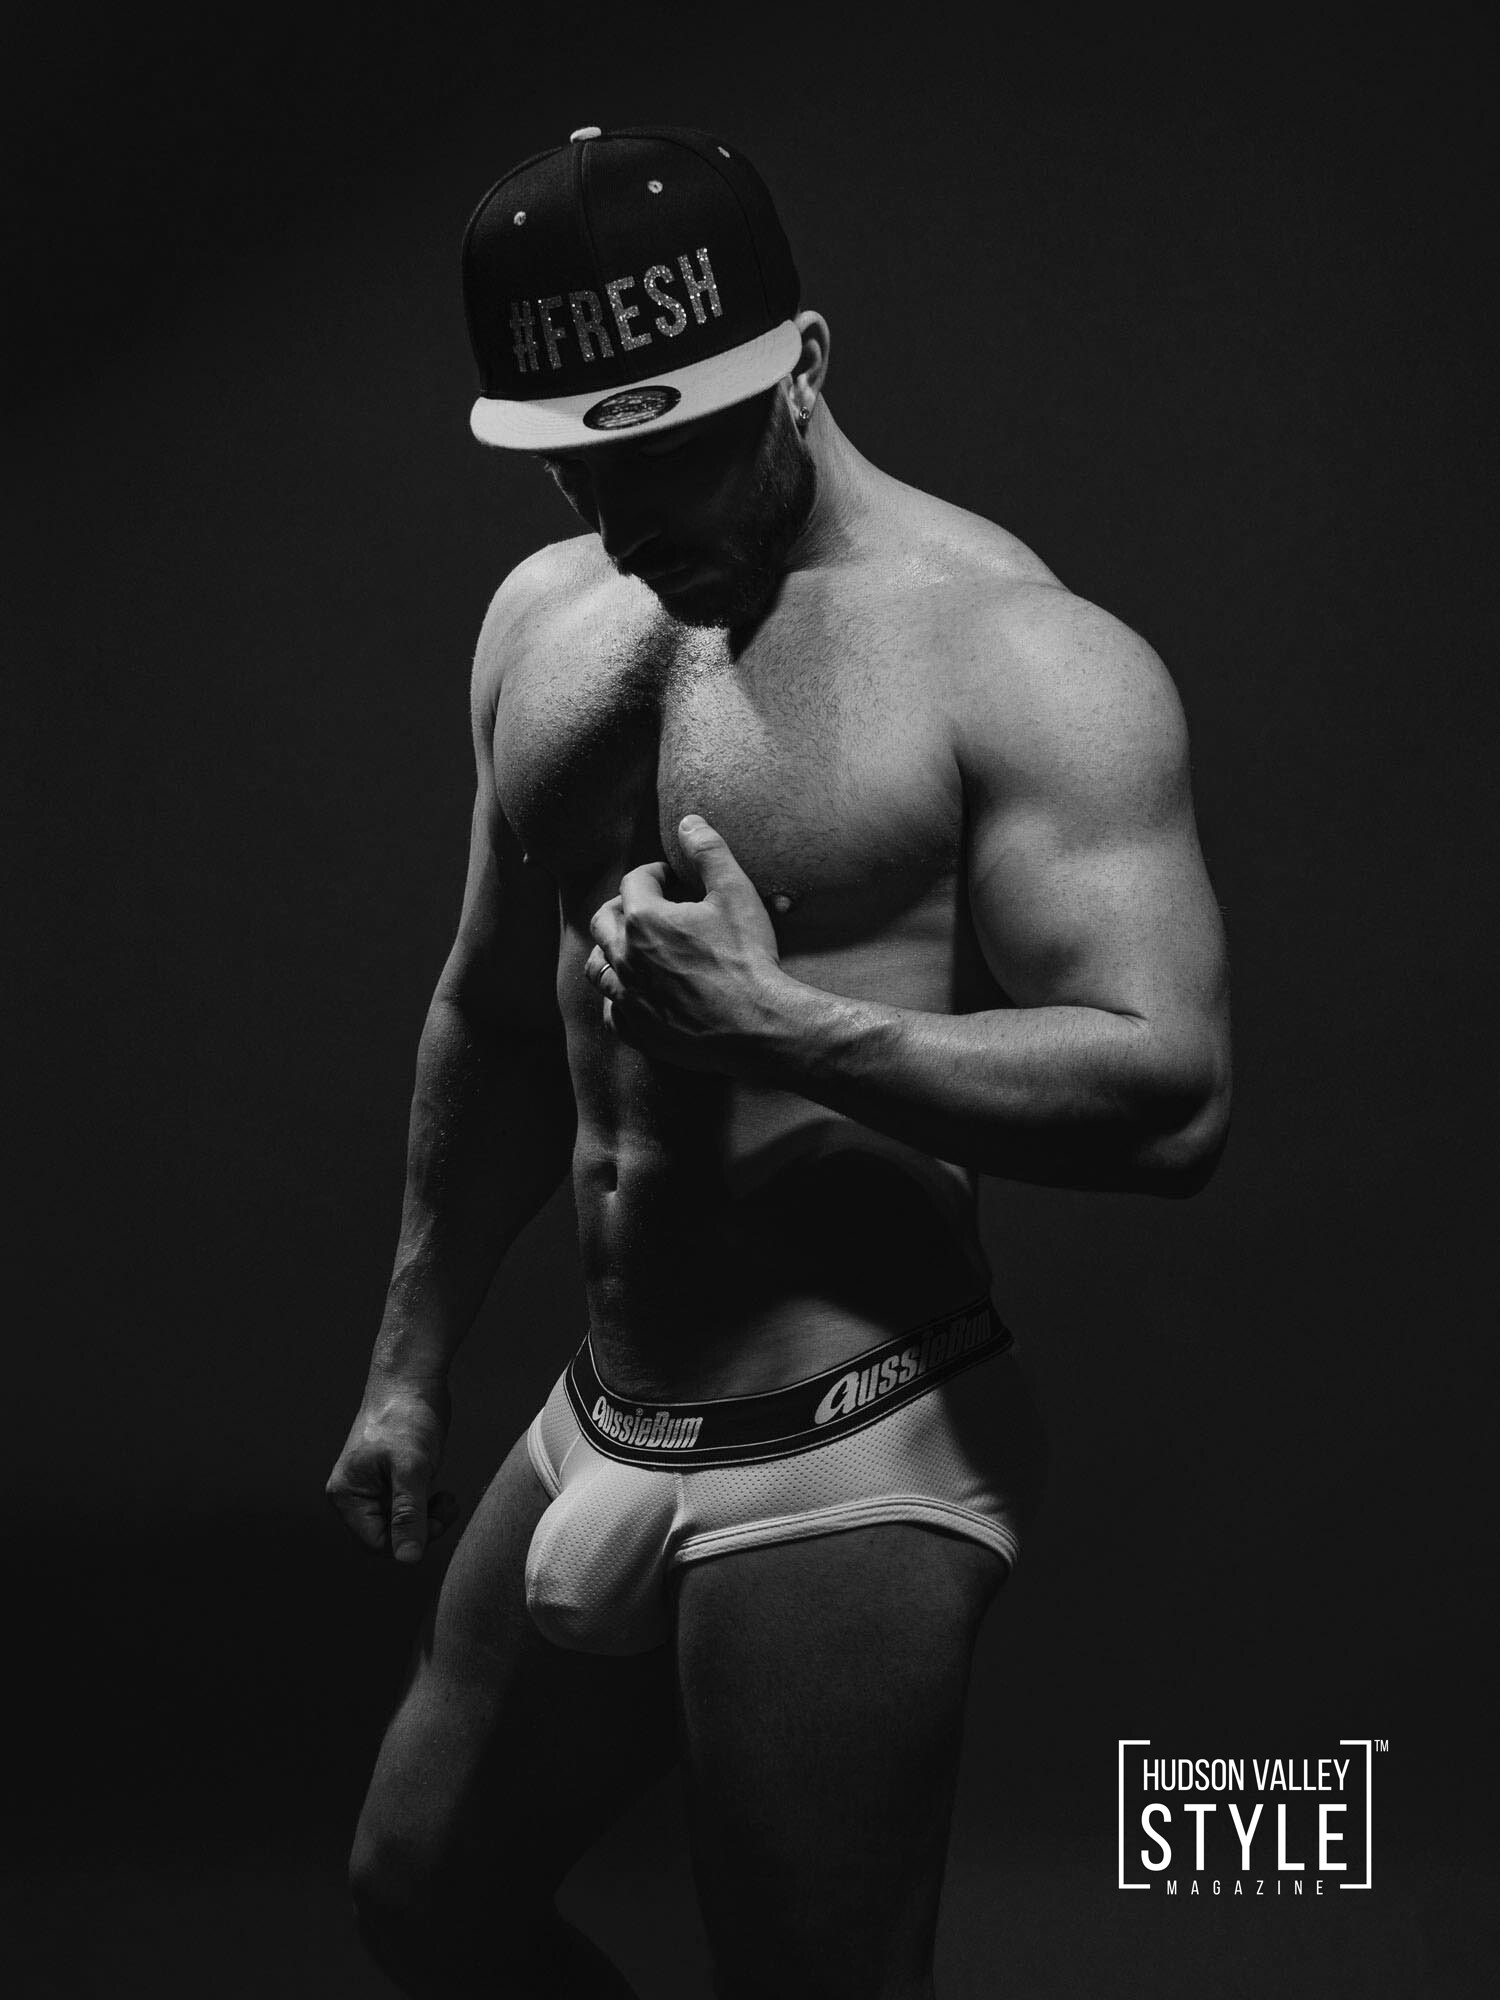 Fine Art Fitness and Bodybuilding Photography by Photographer Maxwell Alexander – Best Gay OnlyFans Fitness Coach – Best Photographer on OnlyFans – Check out Private (18+) OnlyFans Gallery at OnlyFans.com/maxwellalexander.photo for even more Bodybuilding Motivation Fine Art Photography Work